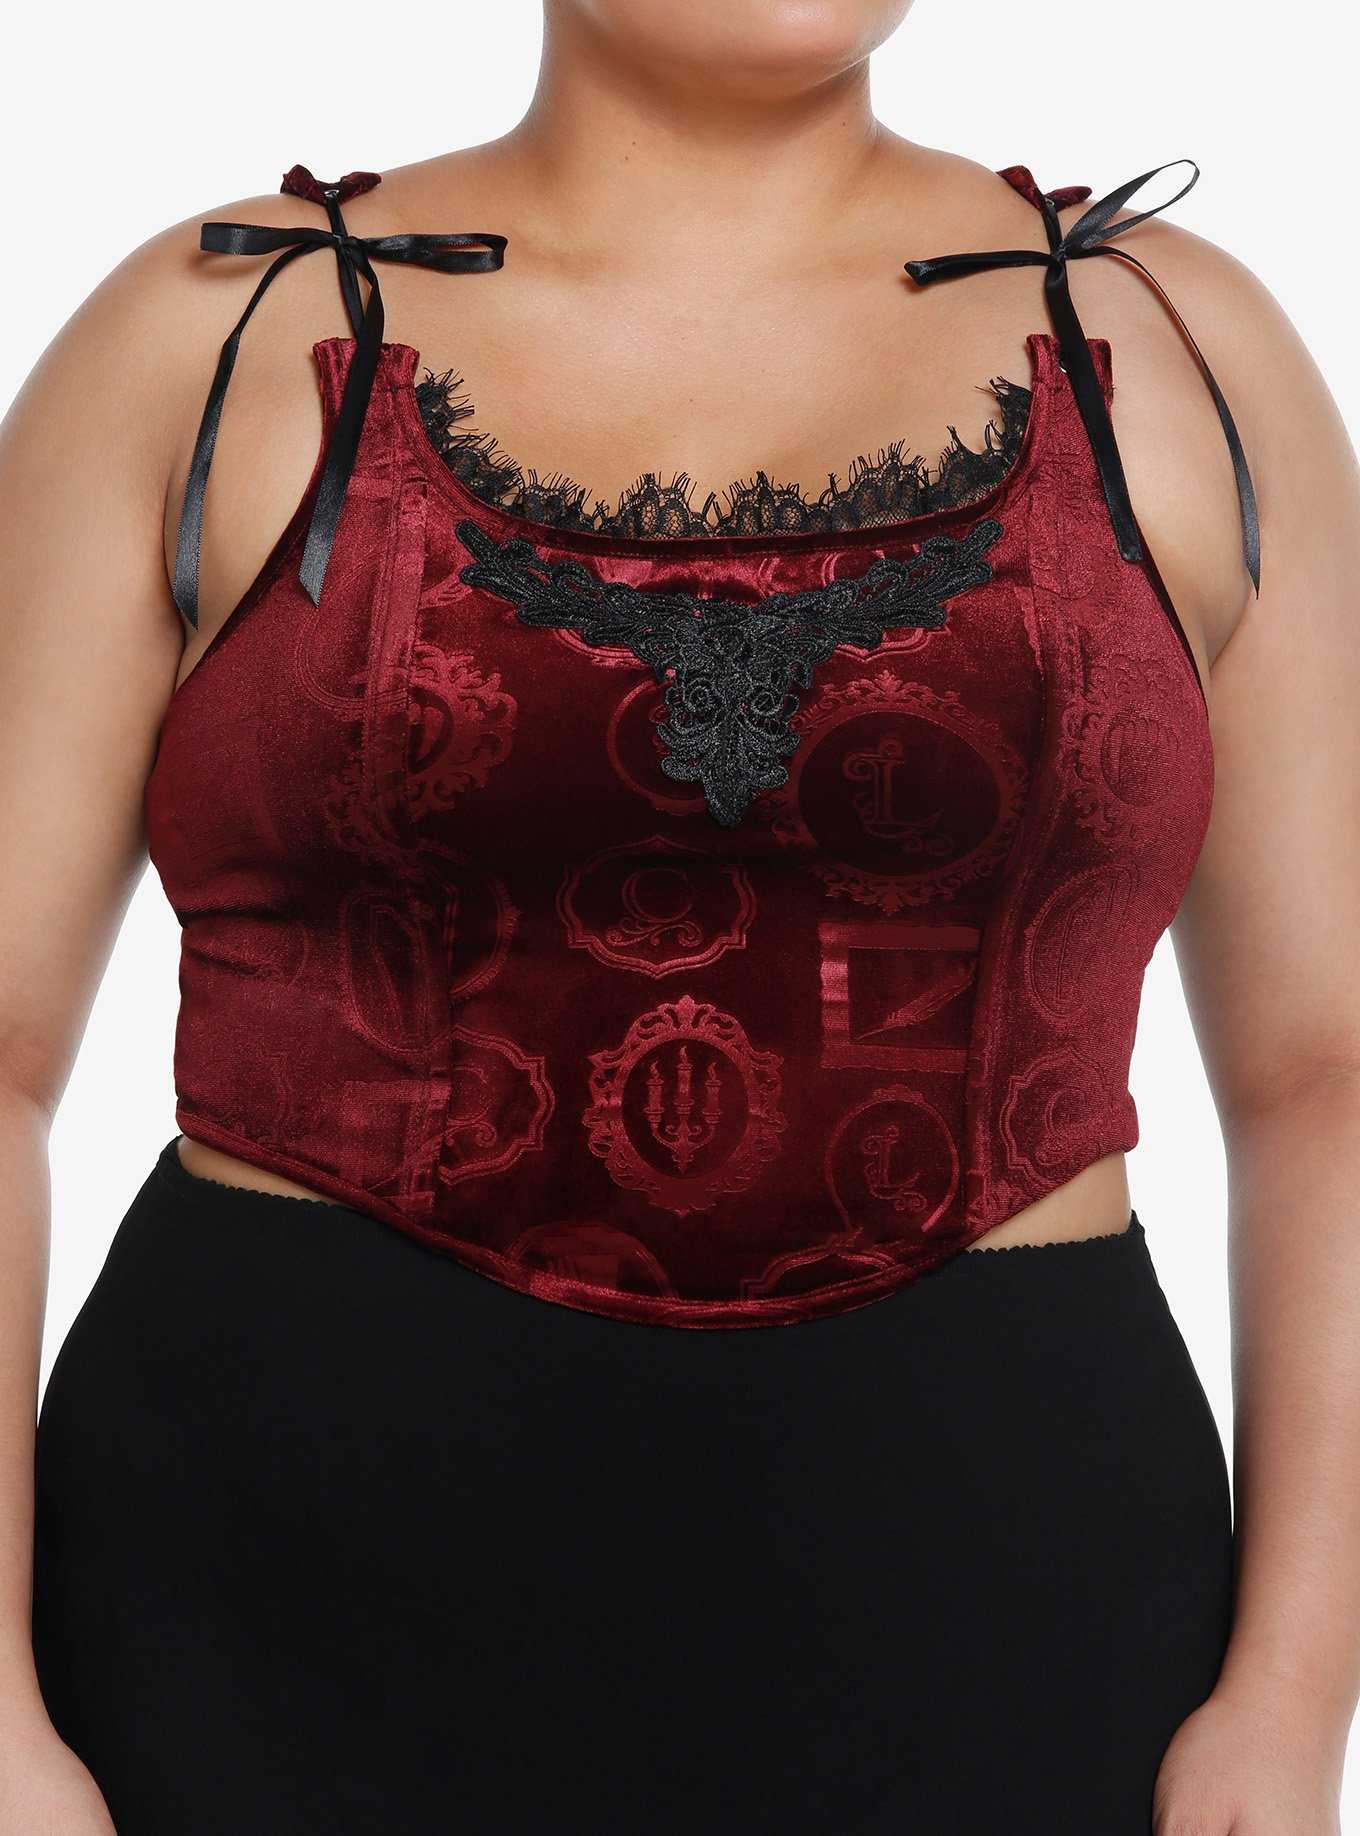 Interview With The Vampire Velvet Lace Girls Corset Plus Size, , hi-res